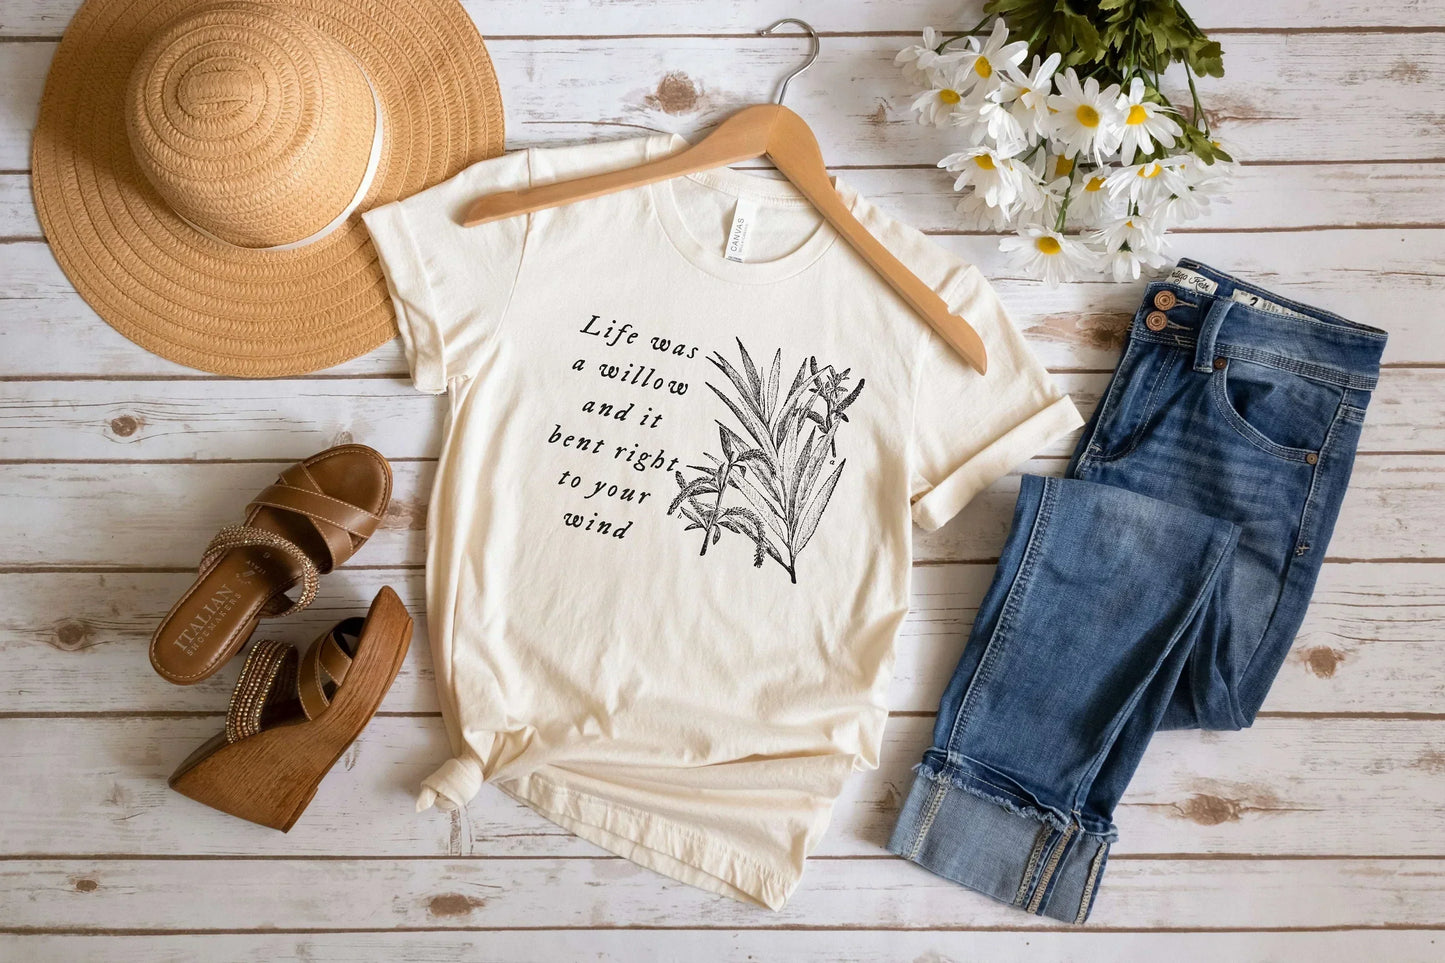 Willow Tree, Taylor Swift shirt, Forklore Merch, Evermore sweatshirt, Taylorswift sweatshirt, Lover Merch, Swiftie merch, Taylor swift gift